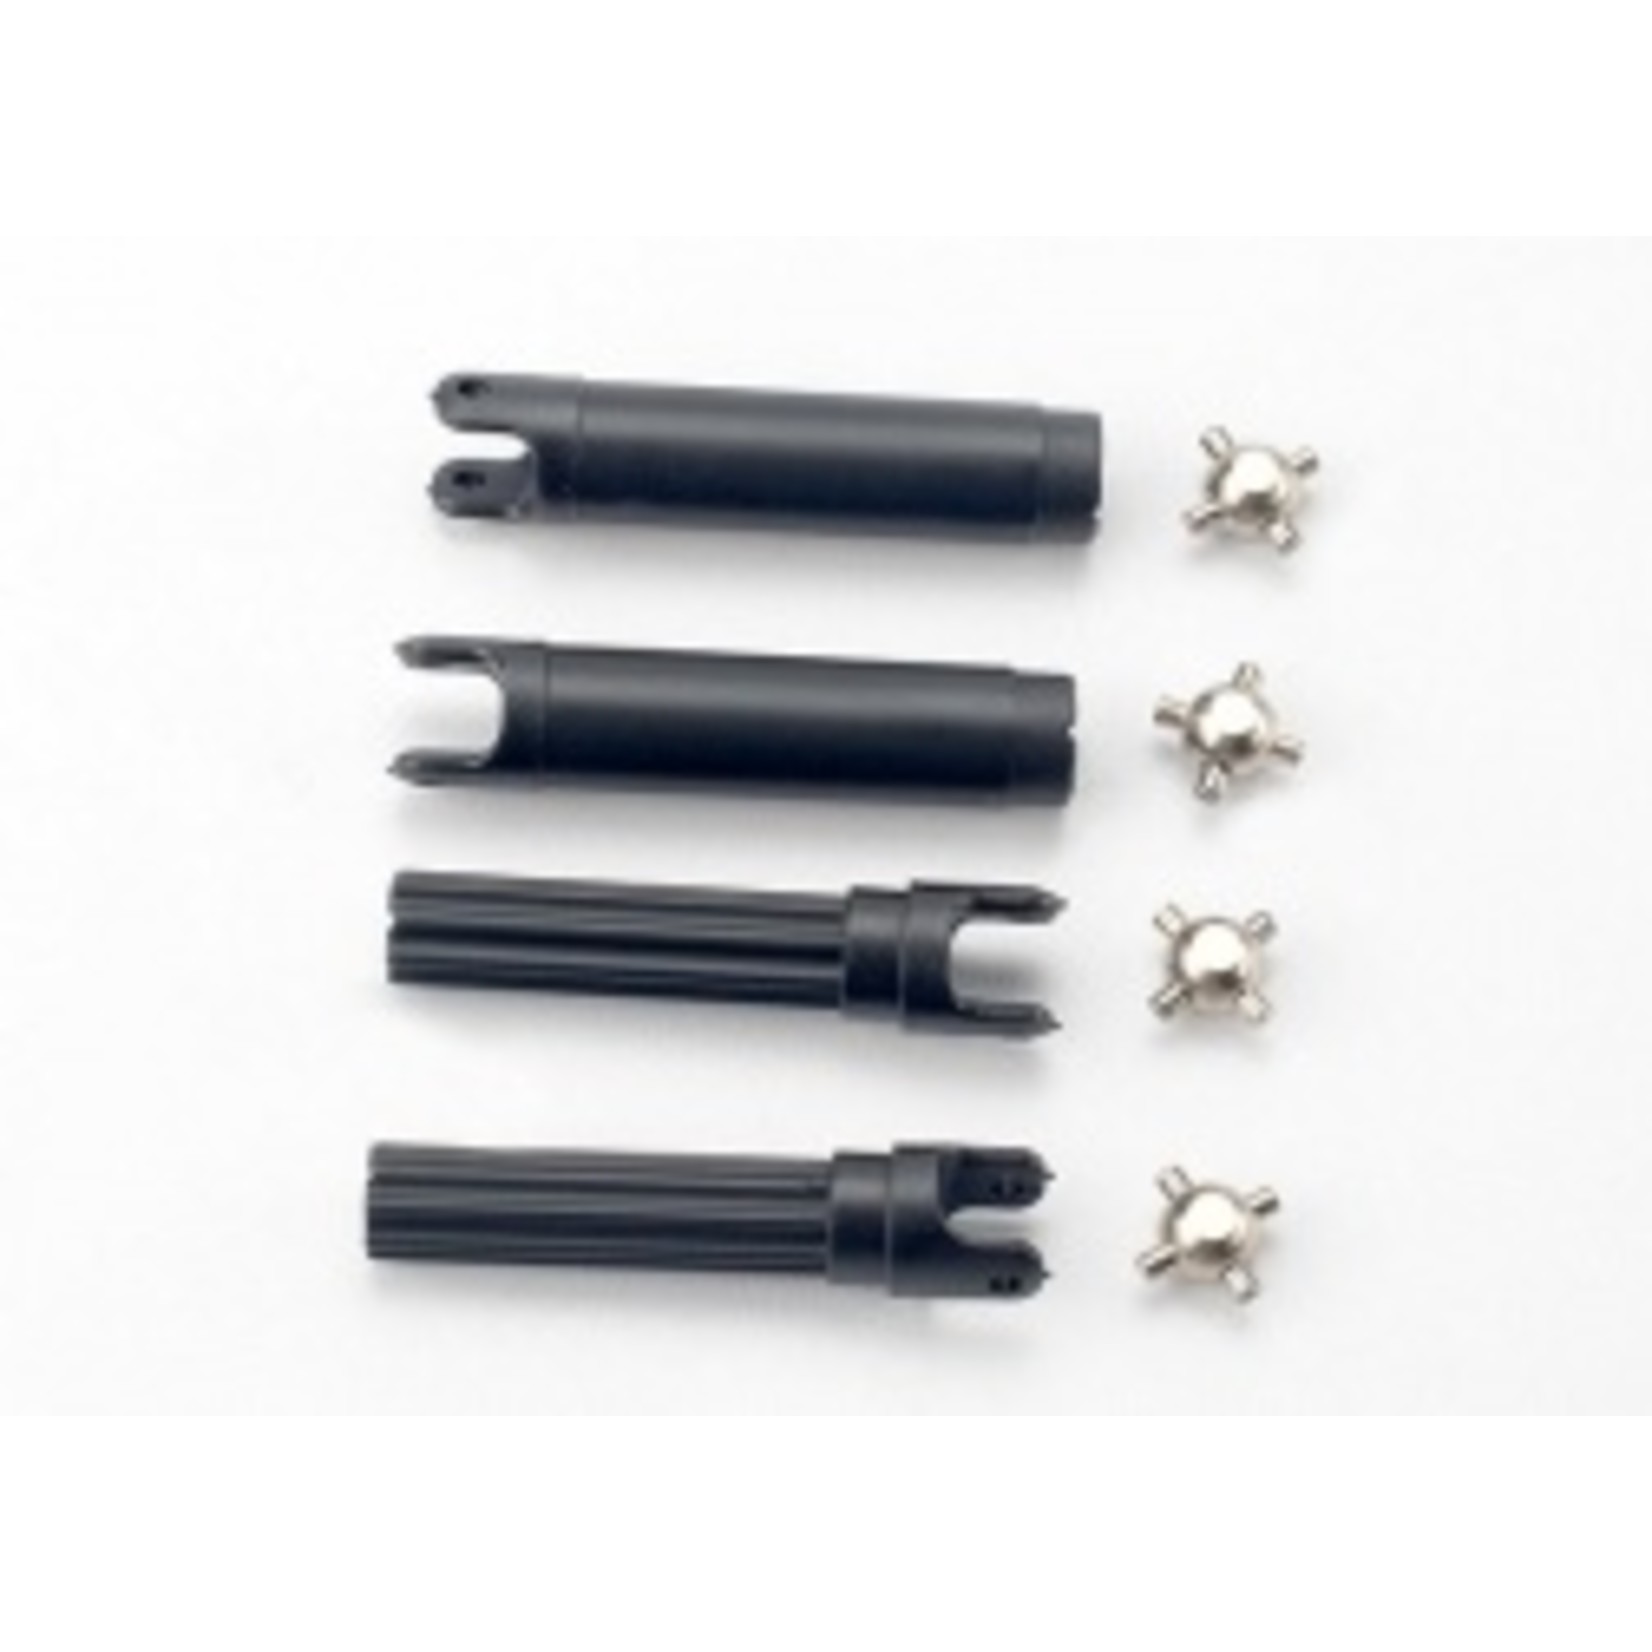 Traxxas 7150 Half shafts, left or right (internal splined half shaft (2)/external splined half shaft) (2))/ metal u-joints (4)